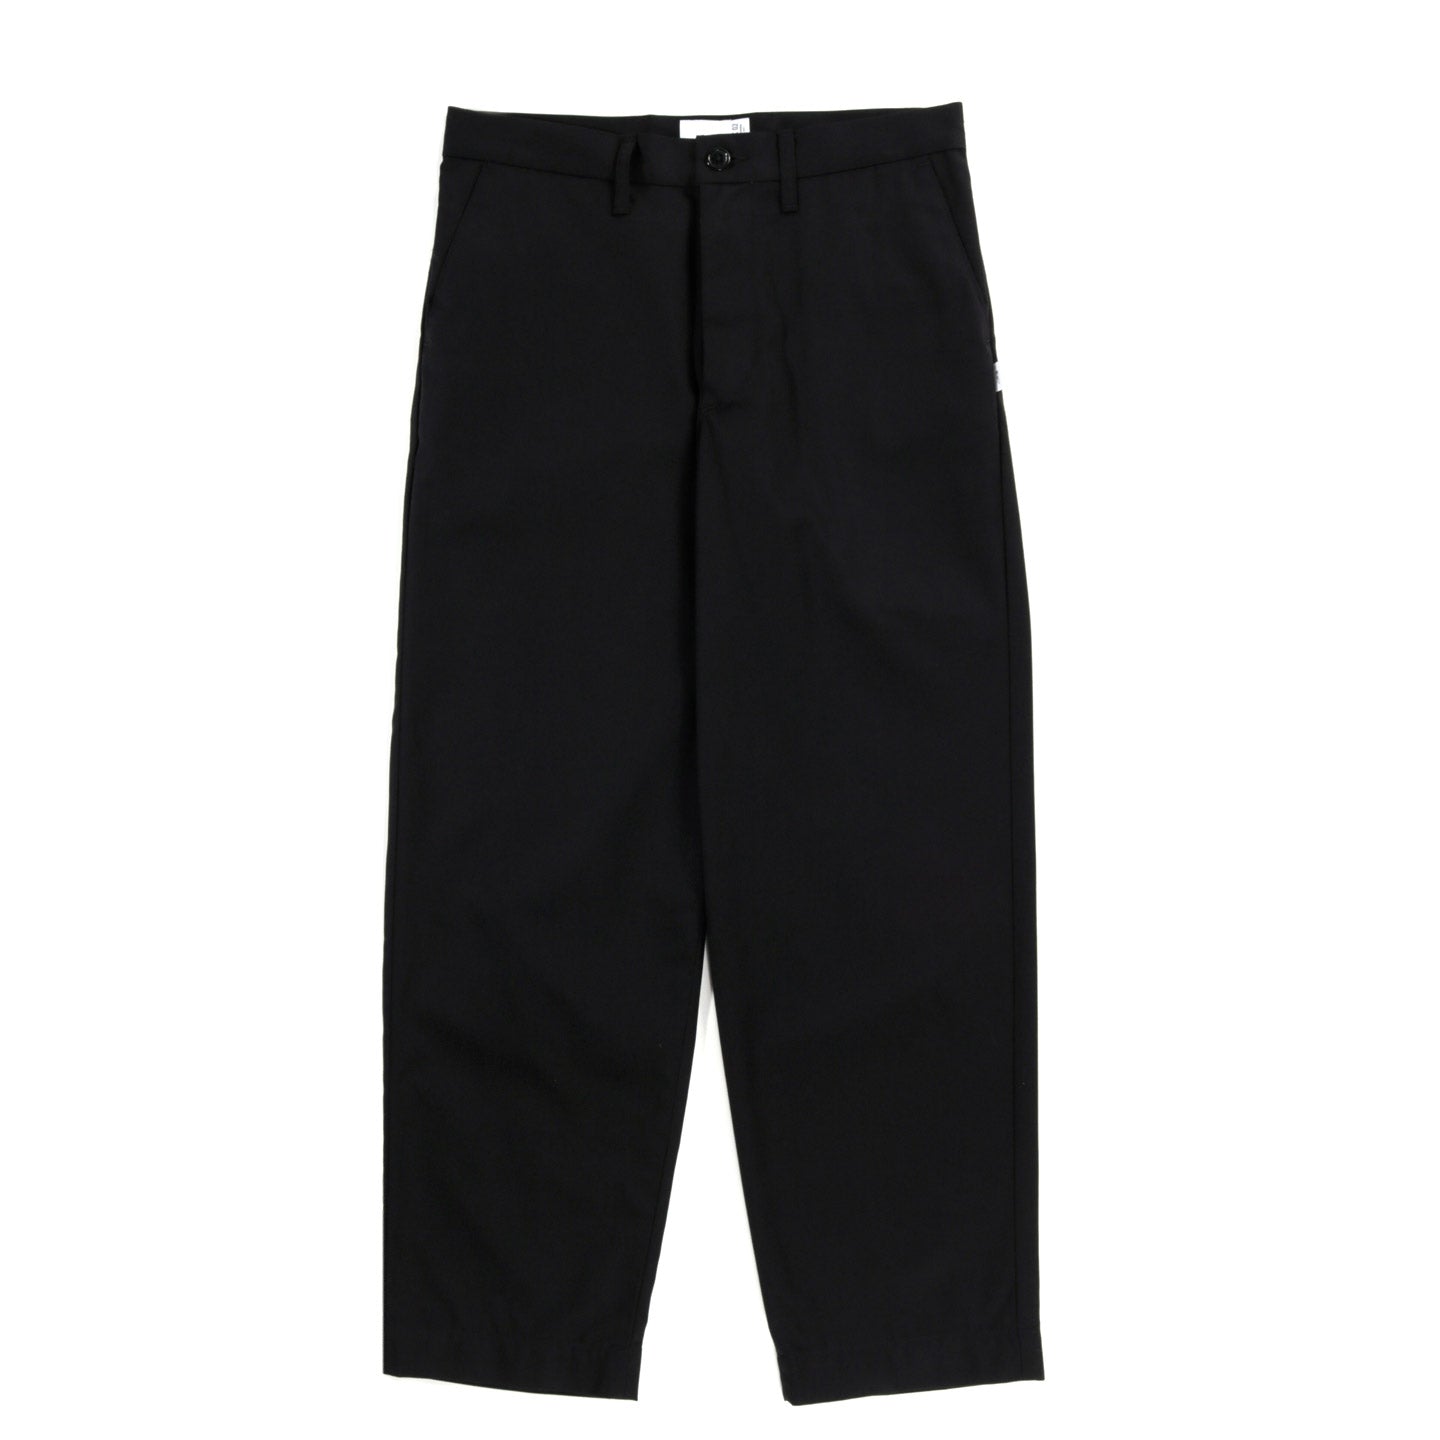 WTAPS CREASE TROUSERS BLACK POLY COTTON TWILL TODAY CLOTHING